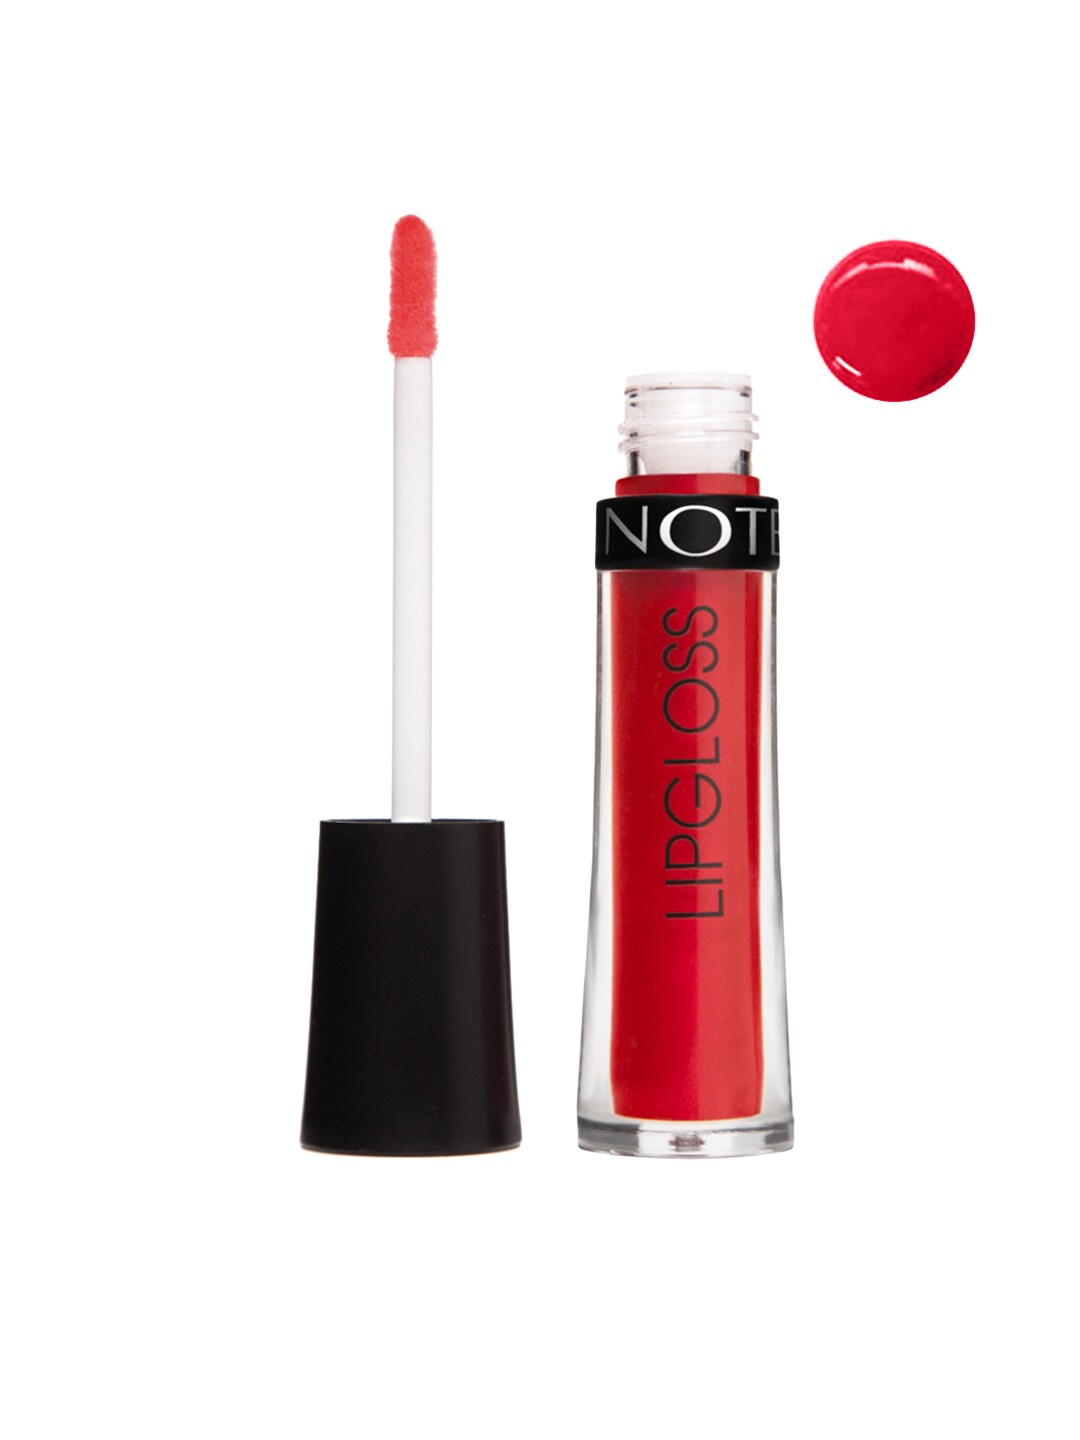 Note Sophisticate Hydra Color Lipgloss 16 Price in India